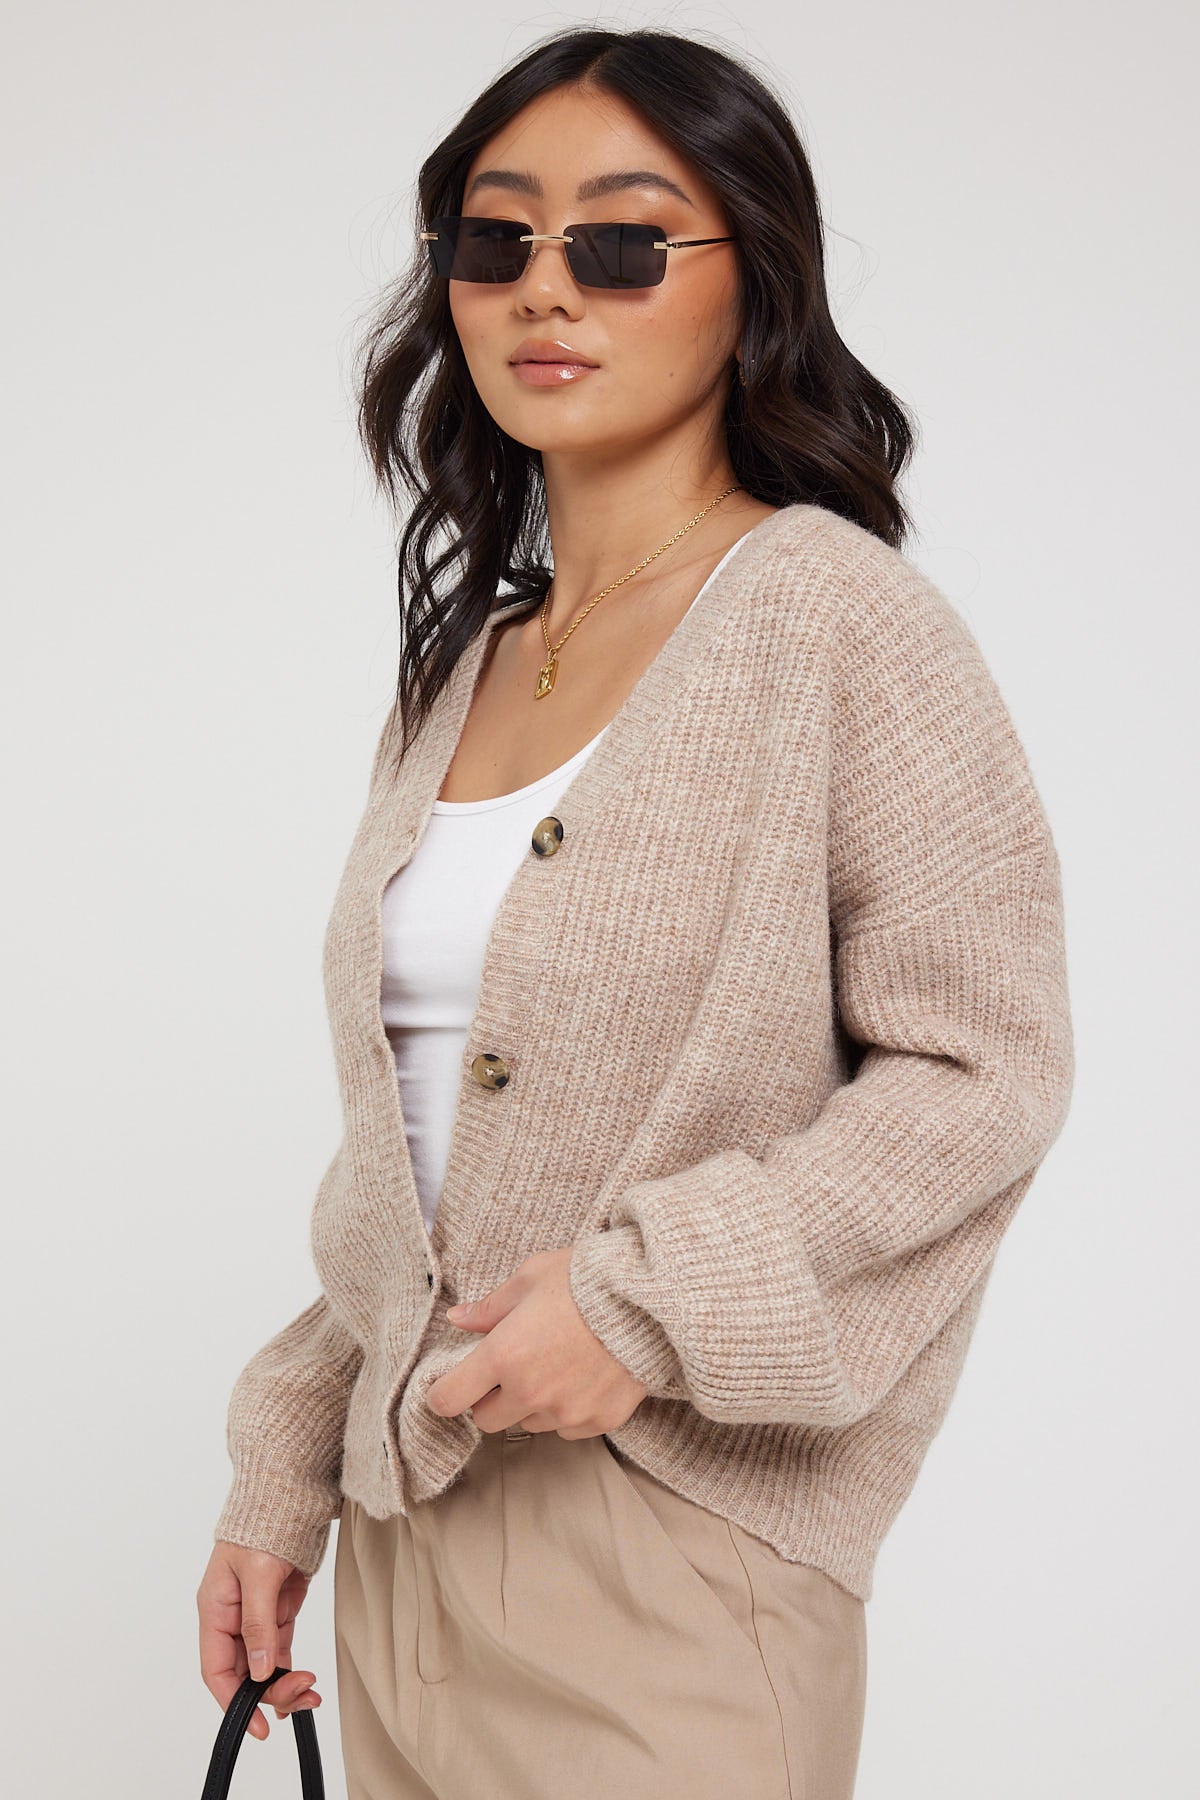 All About Eve Belle Knit Cardigan Oatmeal